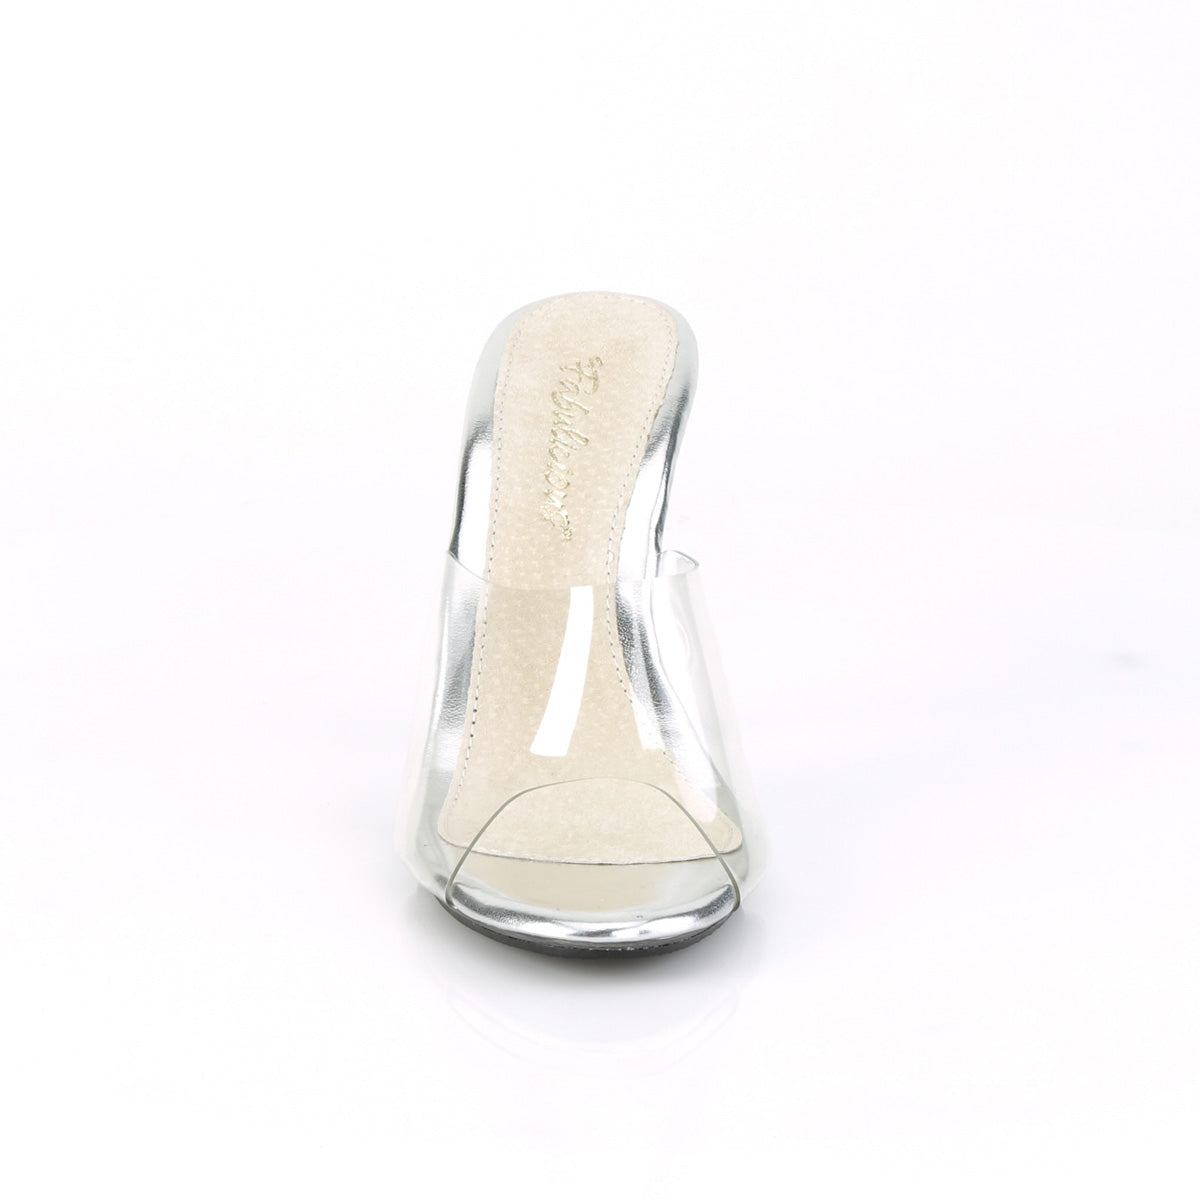 CARESS-401 Clear Stiletto Mules